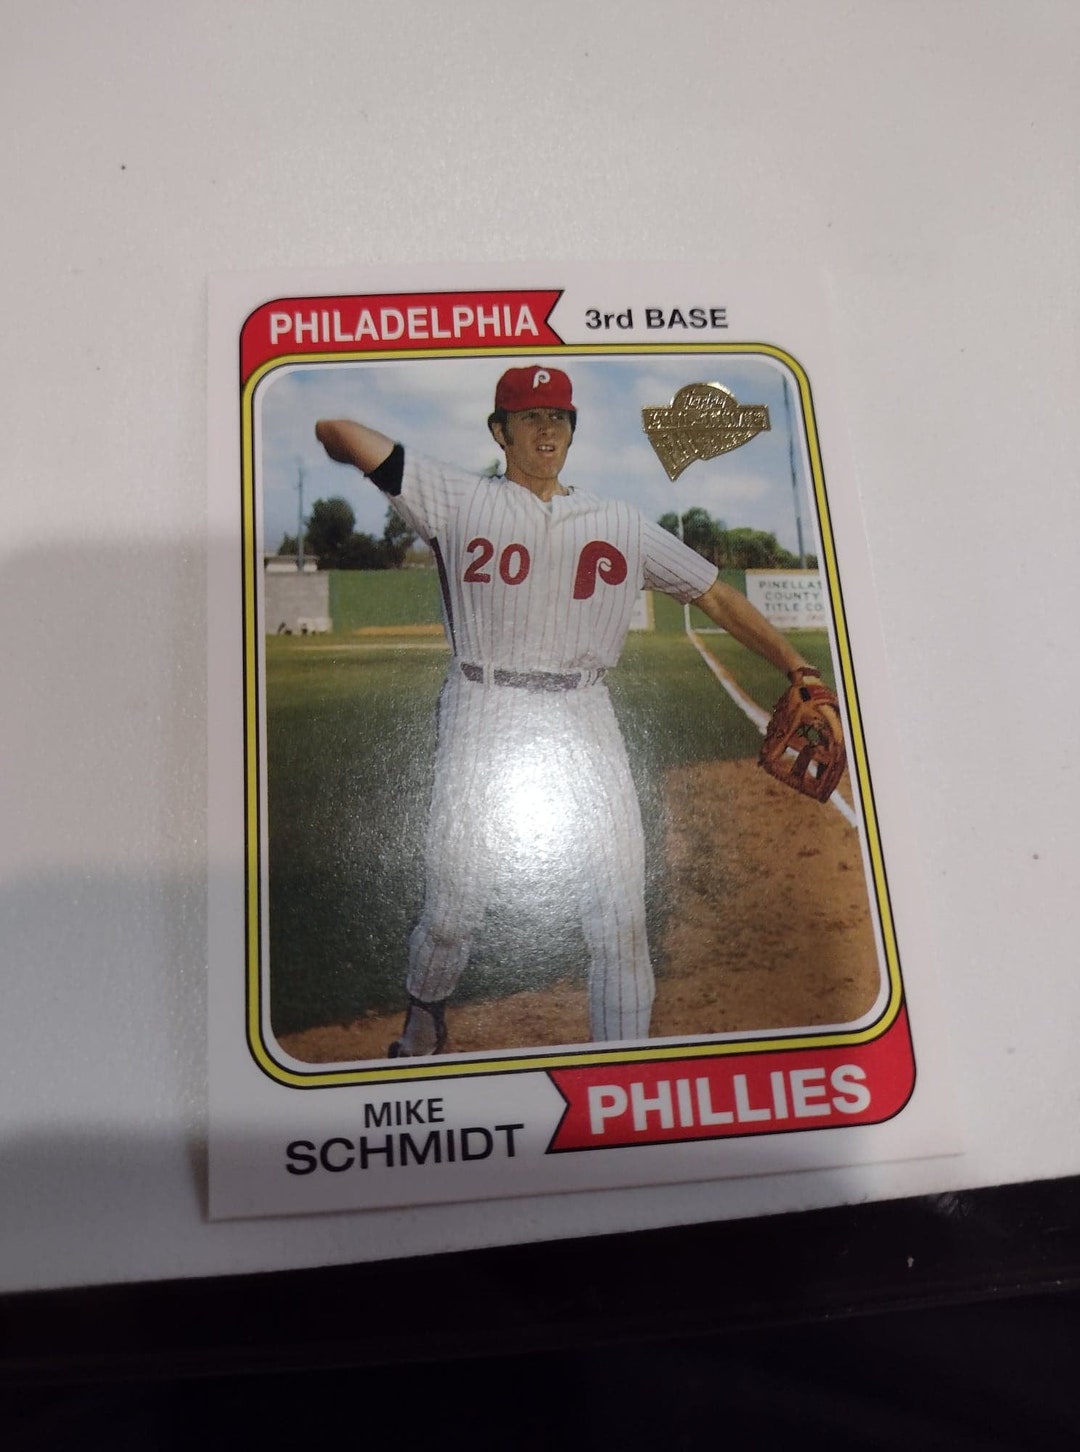 2004 Topps Card 20 Mike Schmidt Phillies 3rd Base in Great 